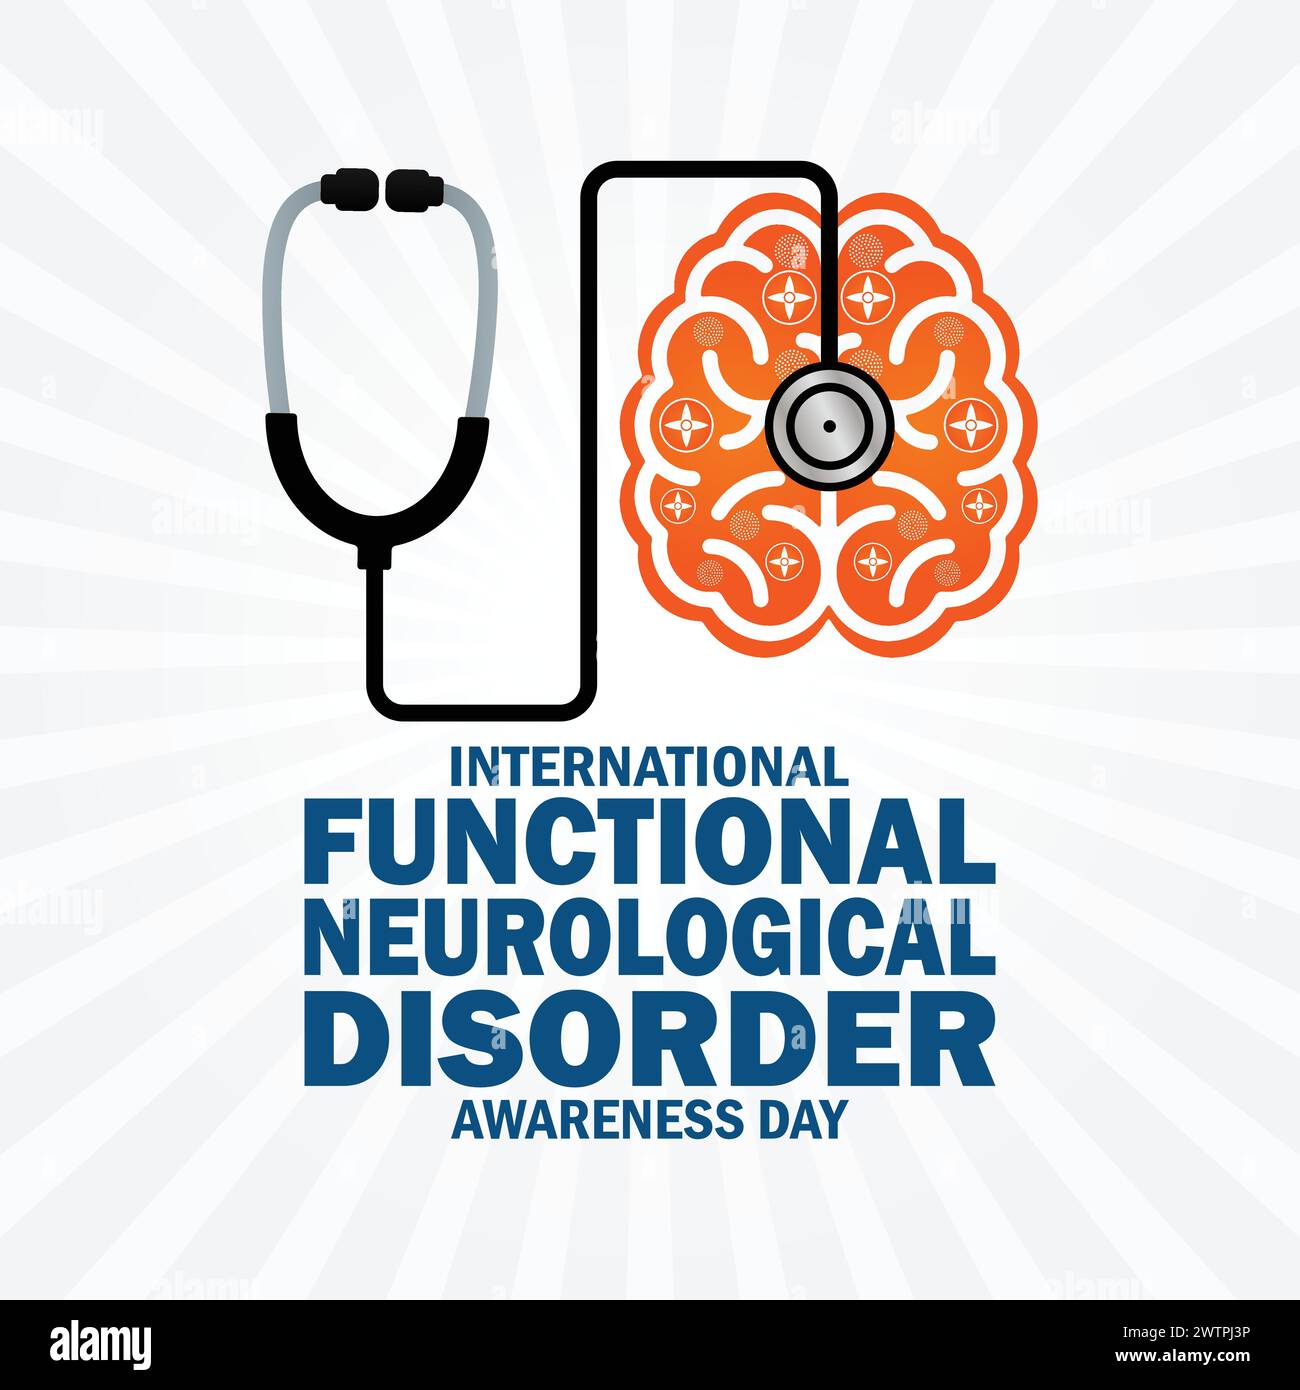 International Functional Neurological Disorder Awareness Day. Holiday concept. Template for background, banner, card, poster with text inscription Stock Vector